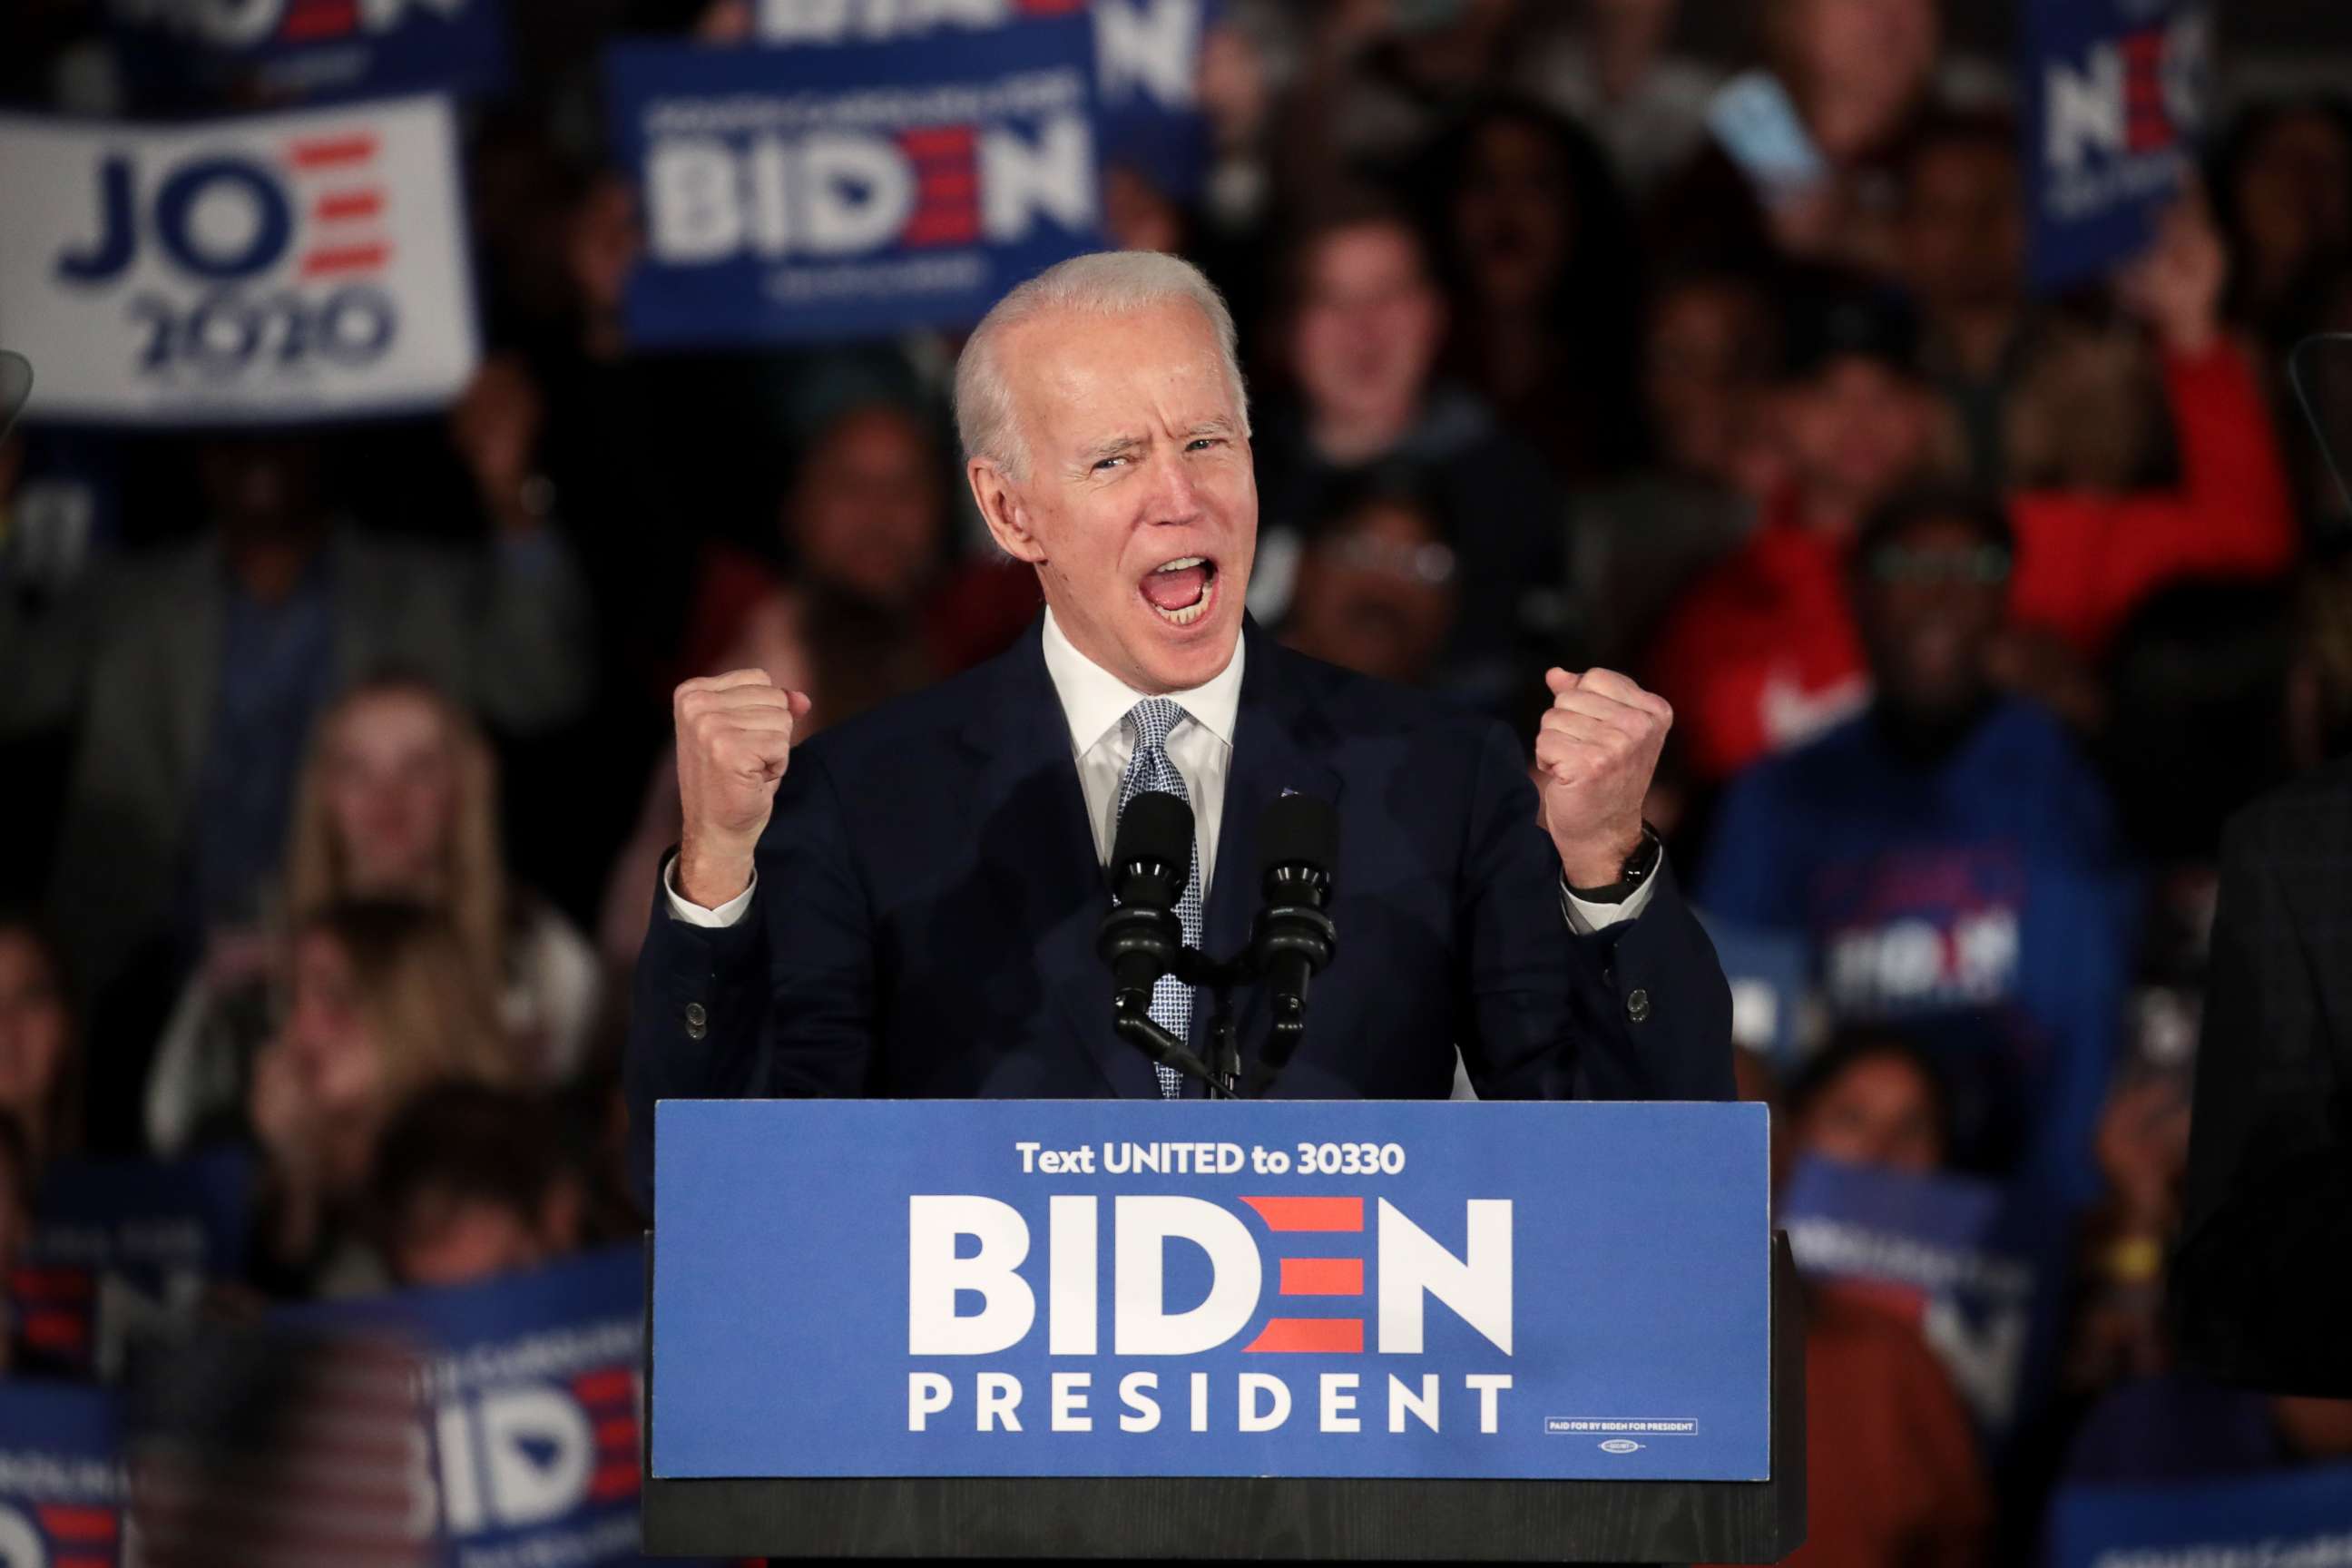 PHOTO: Democratic presidential candidate former Vice President Joe Biden speaks at his primary night event at the University of South Carolina on February 29, 2020 in Columbia, South Carolina.